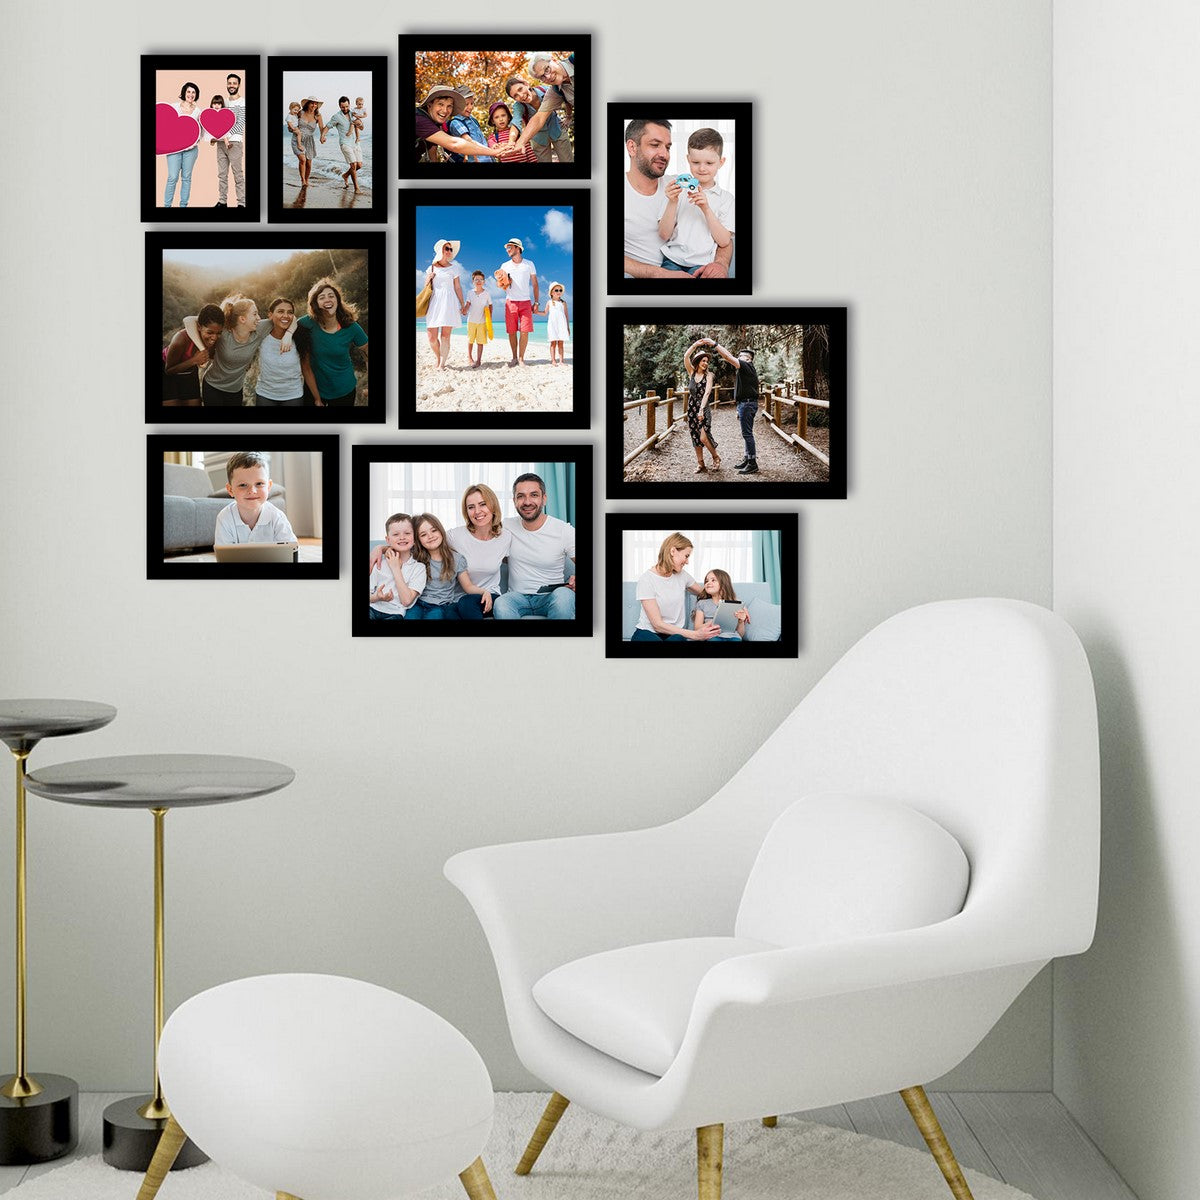 Memory Wall Collage Photo Frame - Set of 10 Photo Frames for 2 Photos of 5"x7", 4 Photos of 6"x8" and 4 Photos of 8"x10" 2